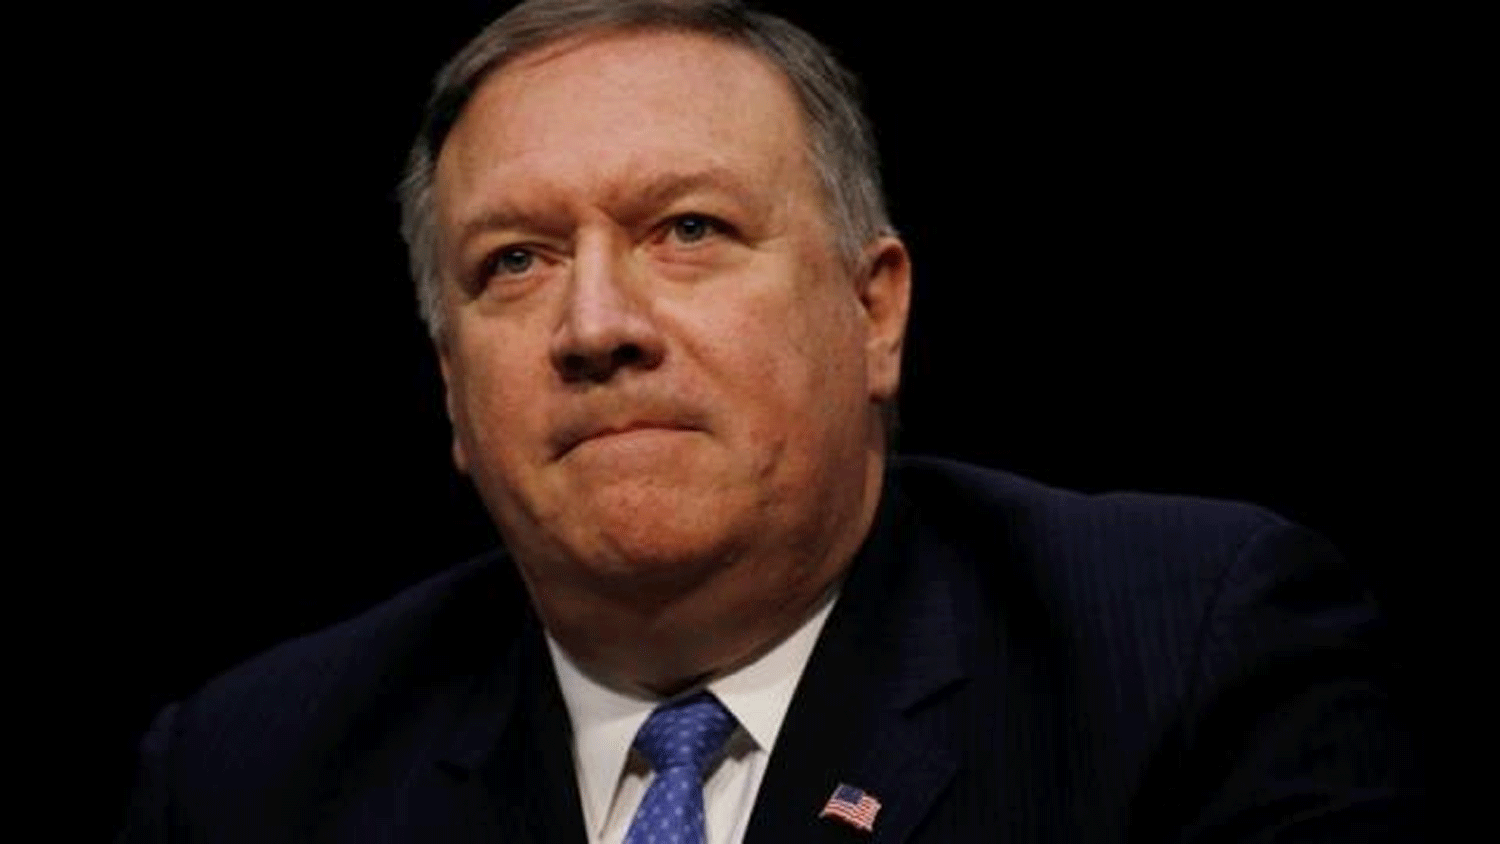 Pompeo offers US help to Lebanon after ‘horrible tragedy’